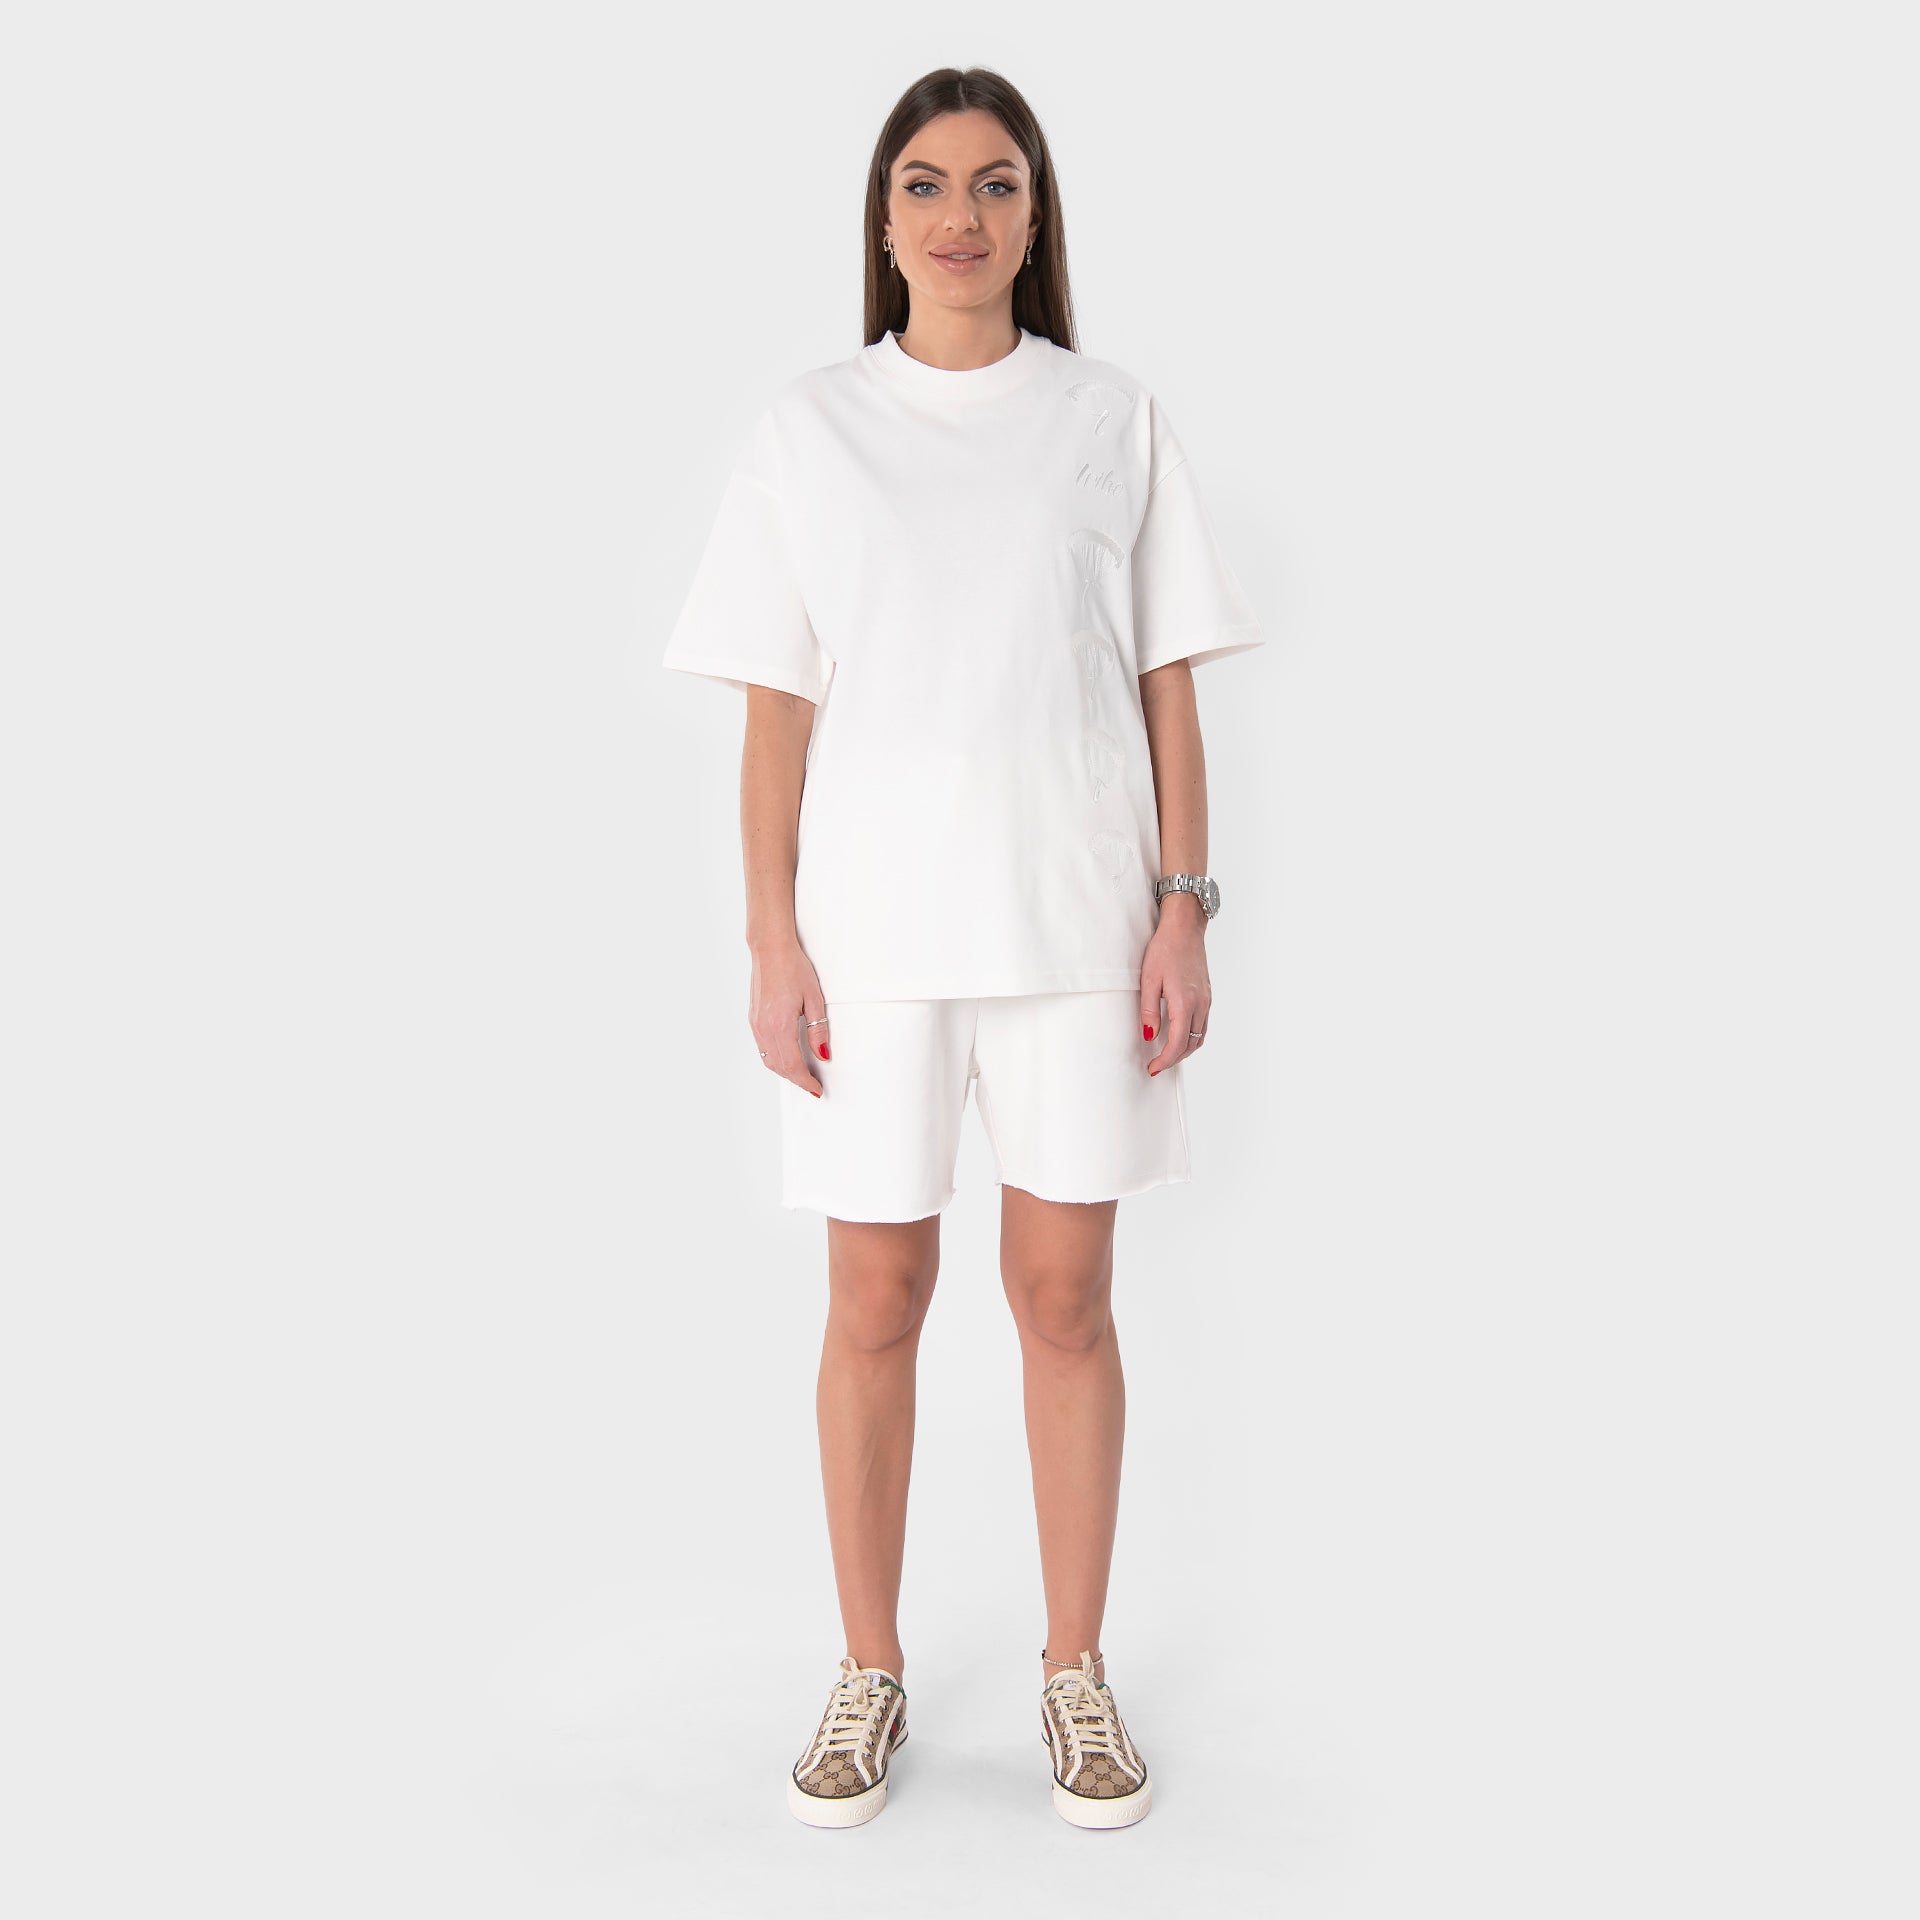 White Parachute T-shirt From Tribe